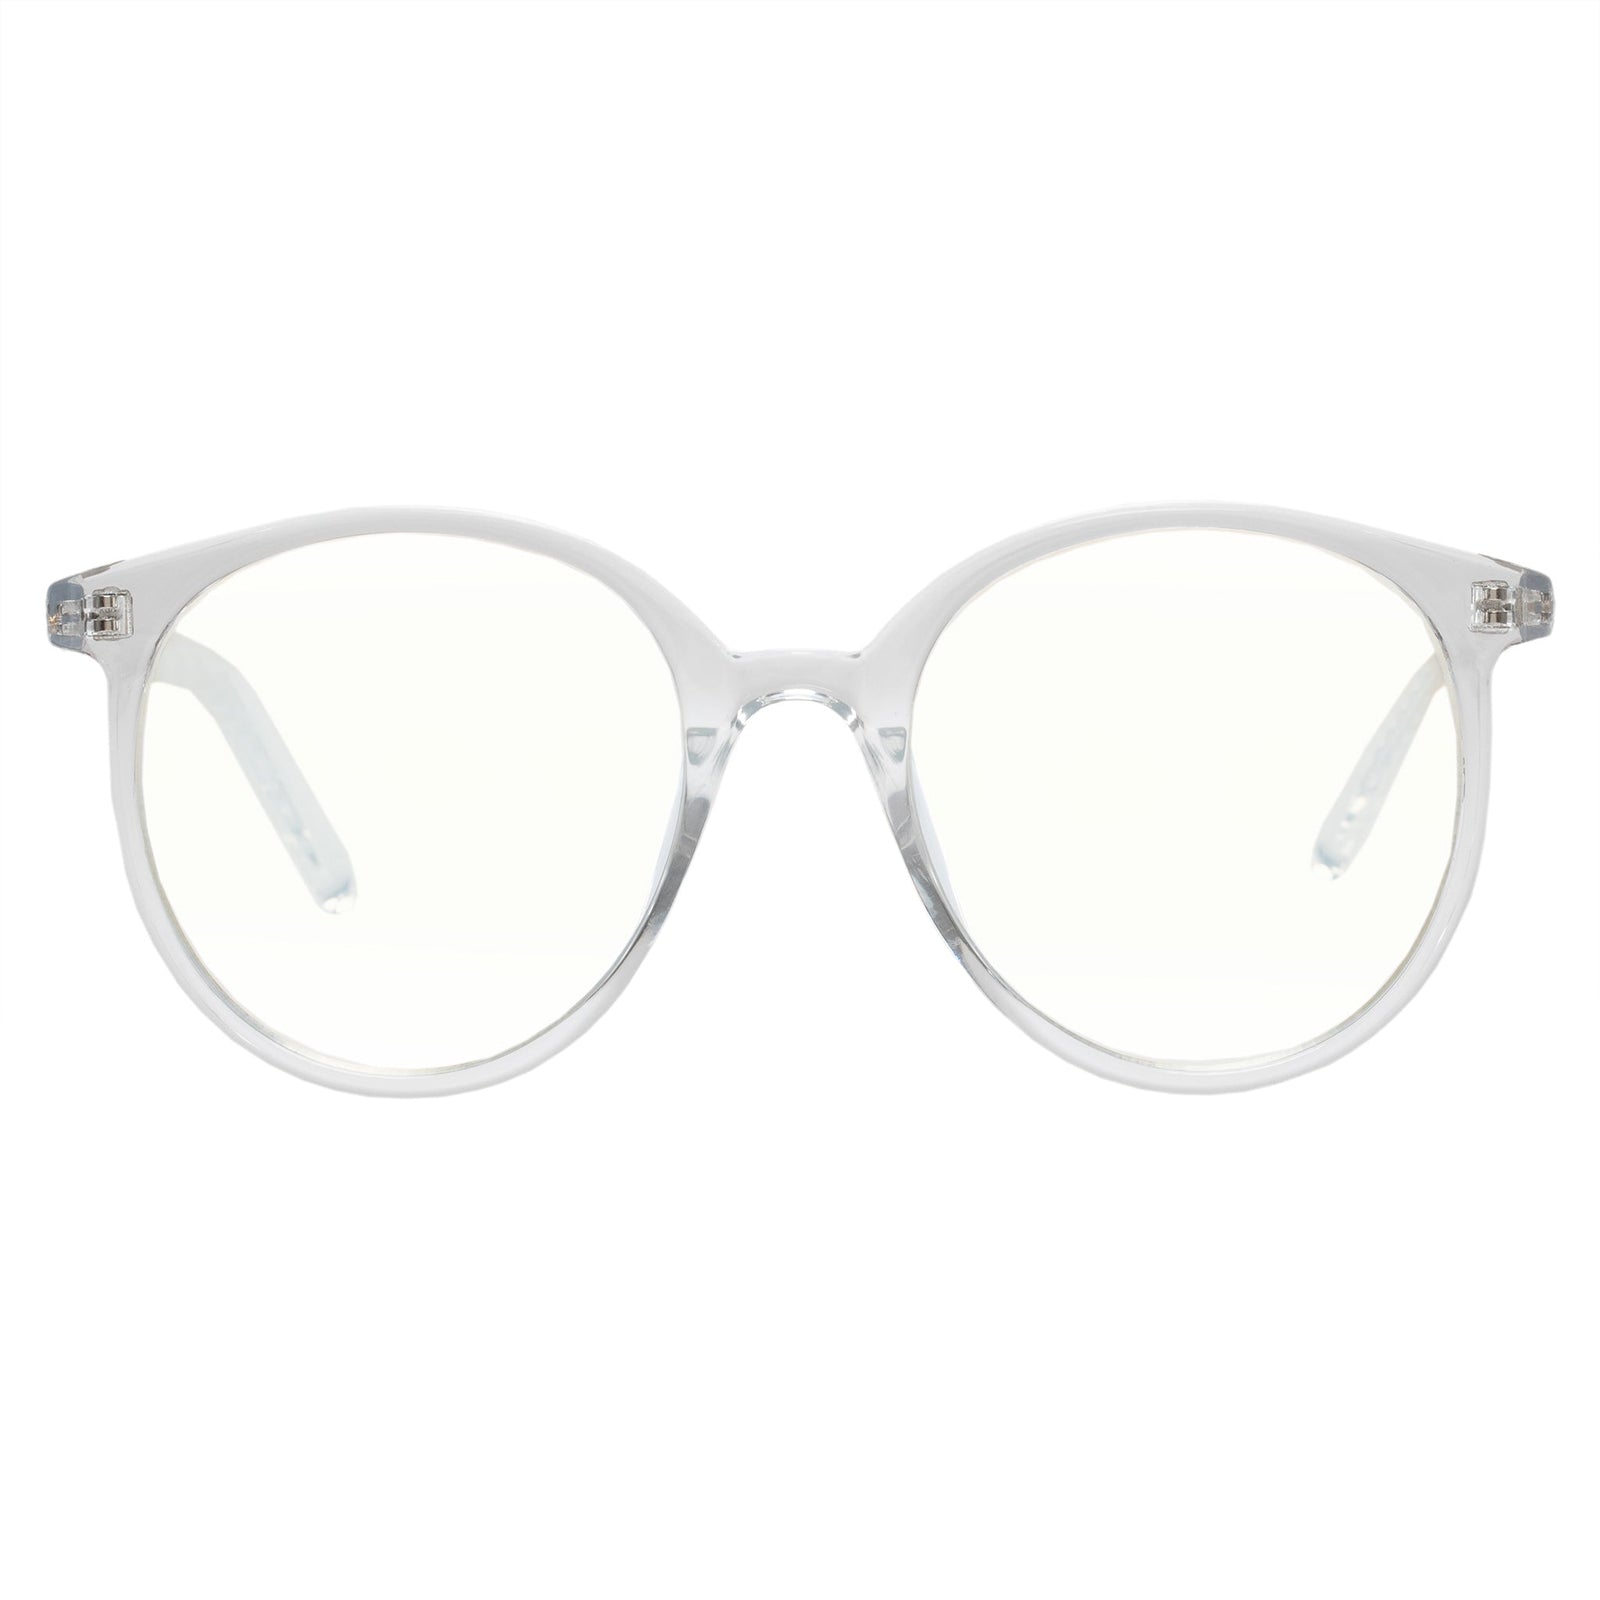 Le Specs - Momento, Women's Crystal/Clear Blue Light